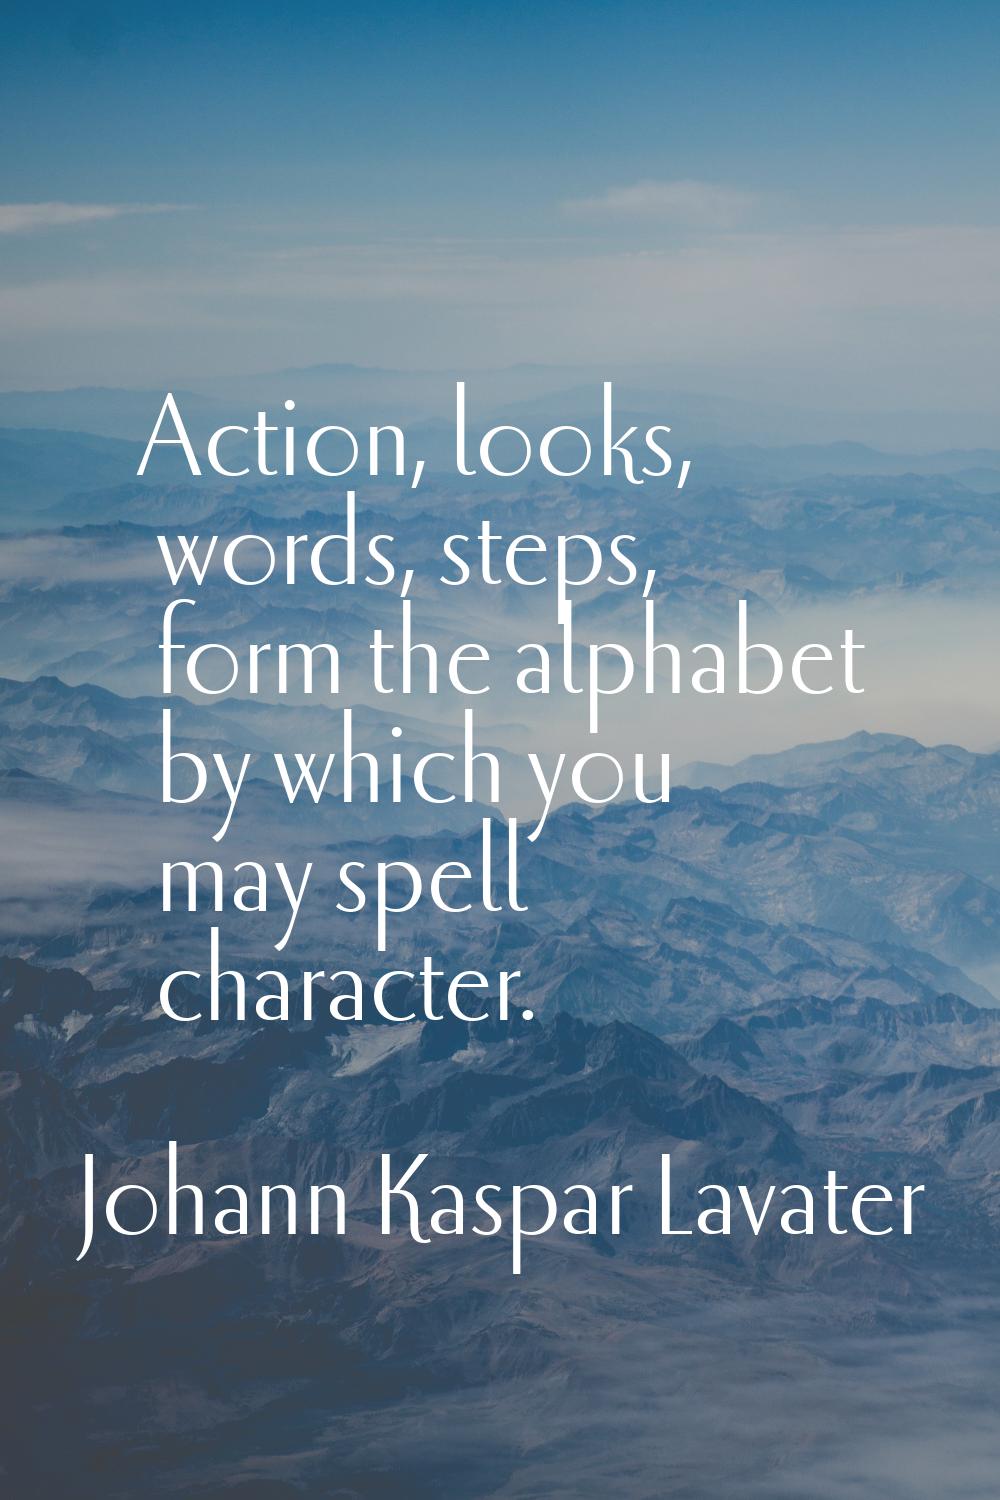 Action, looks, words, steps, form the alphabet by which you may spell character.